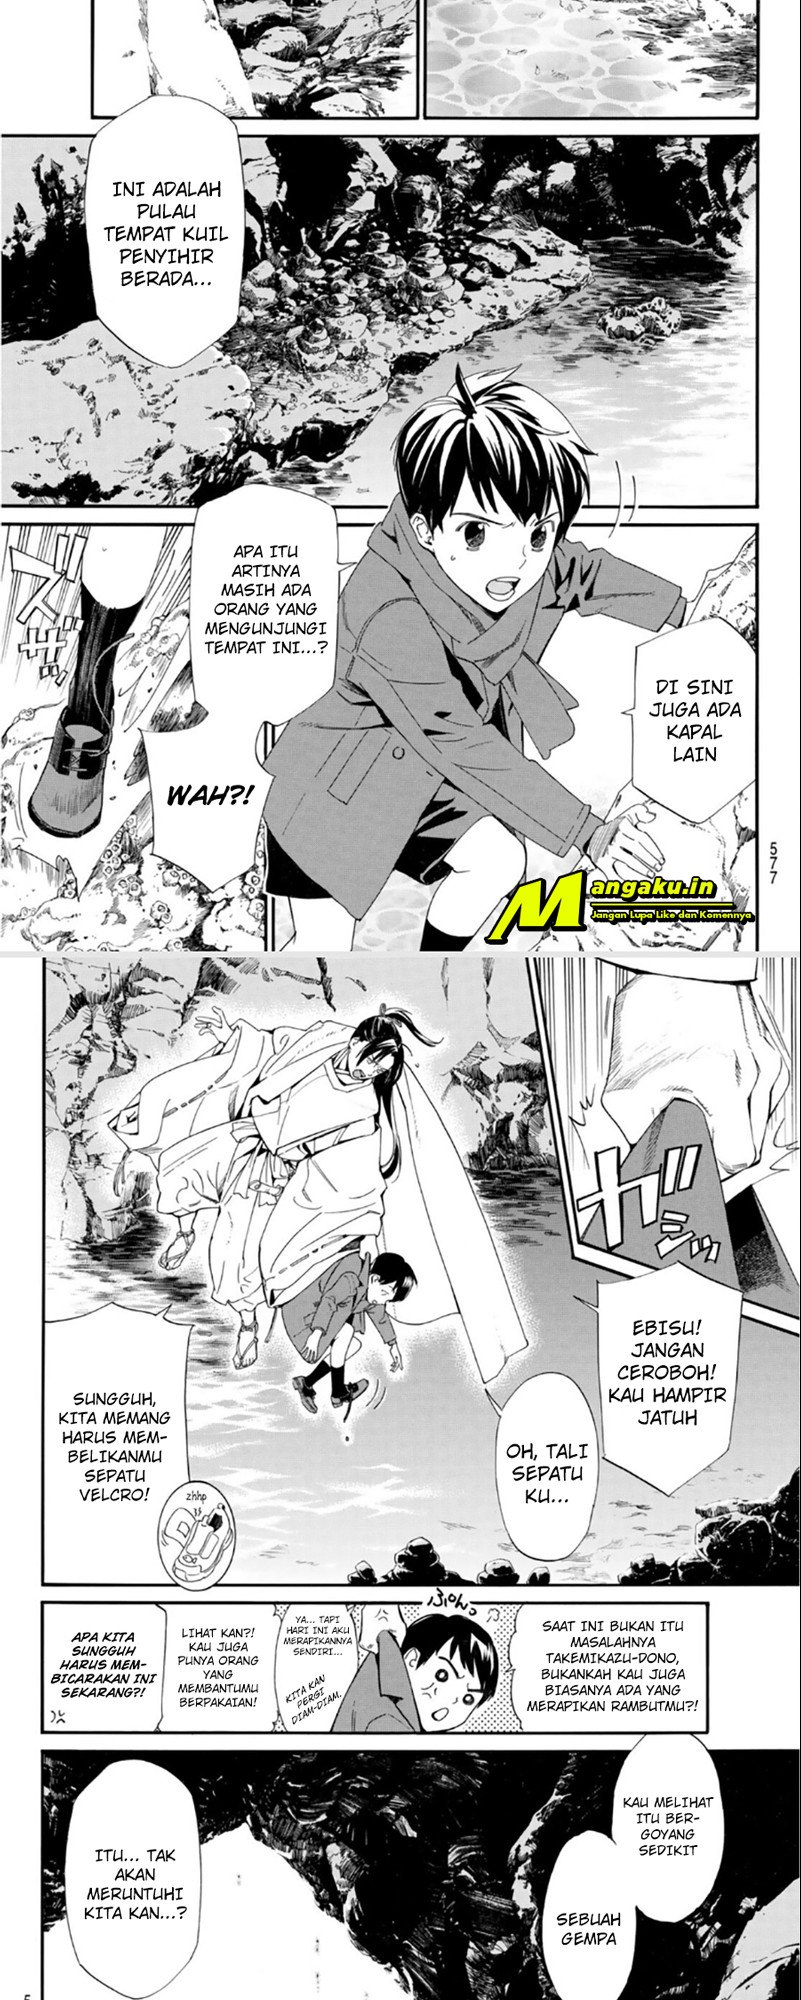 Noragami Chapter 97.2